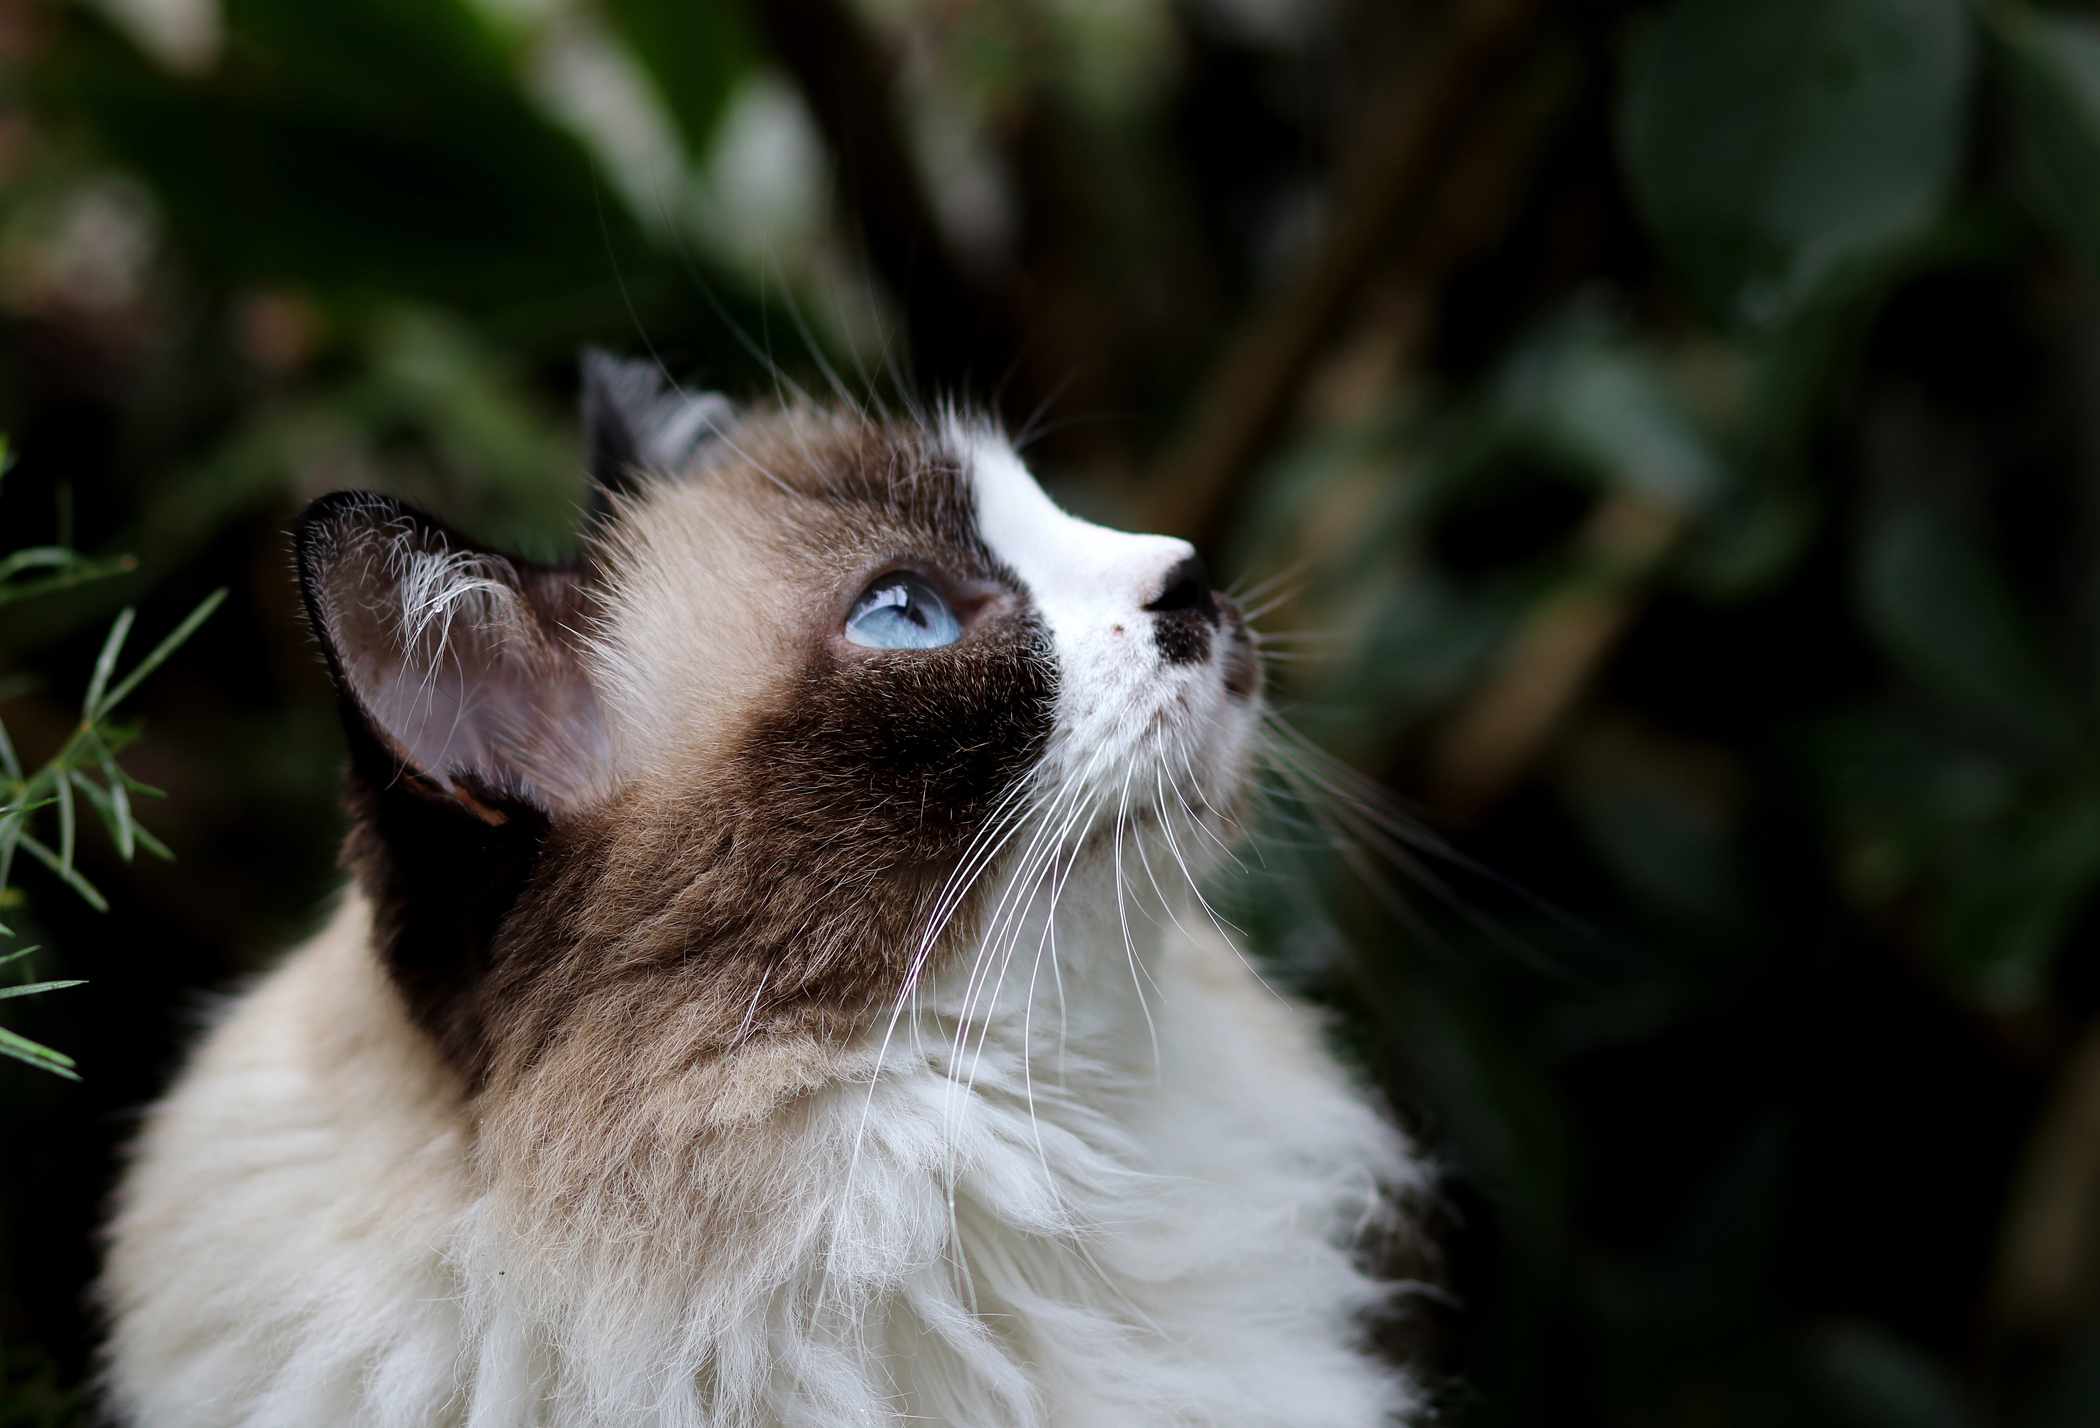 A profile view of a Himalayan cat.